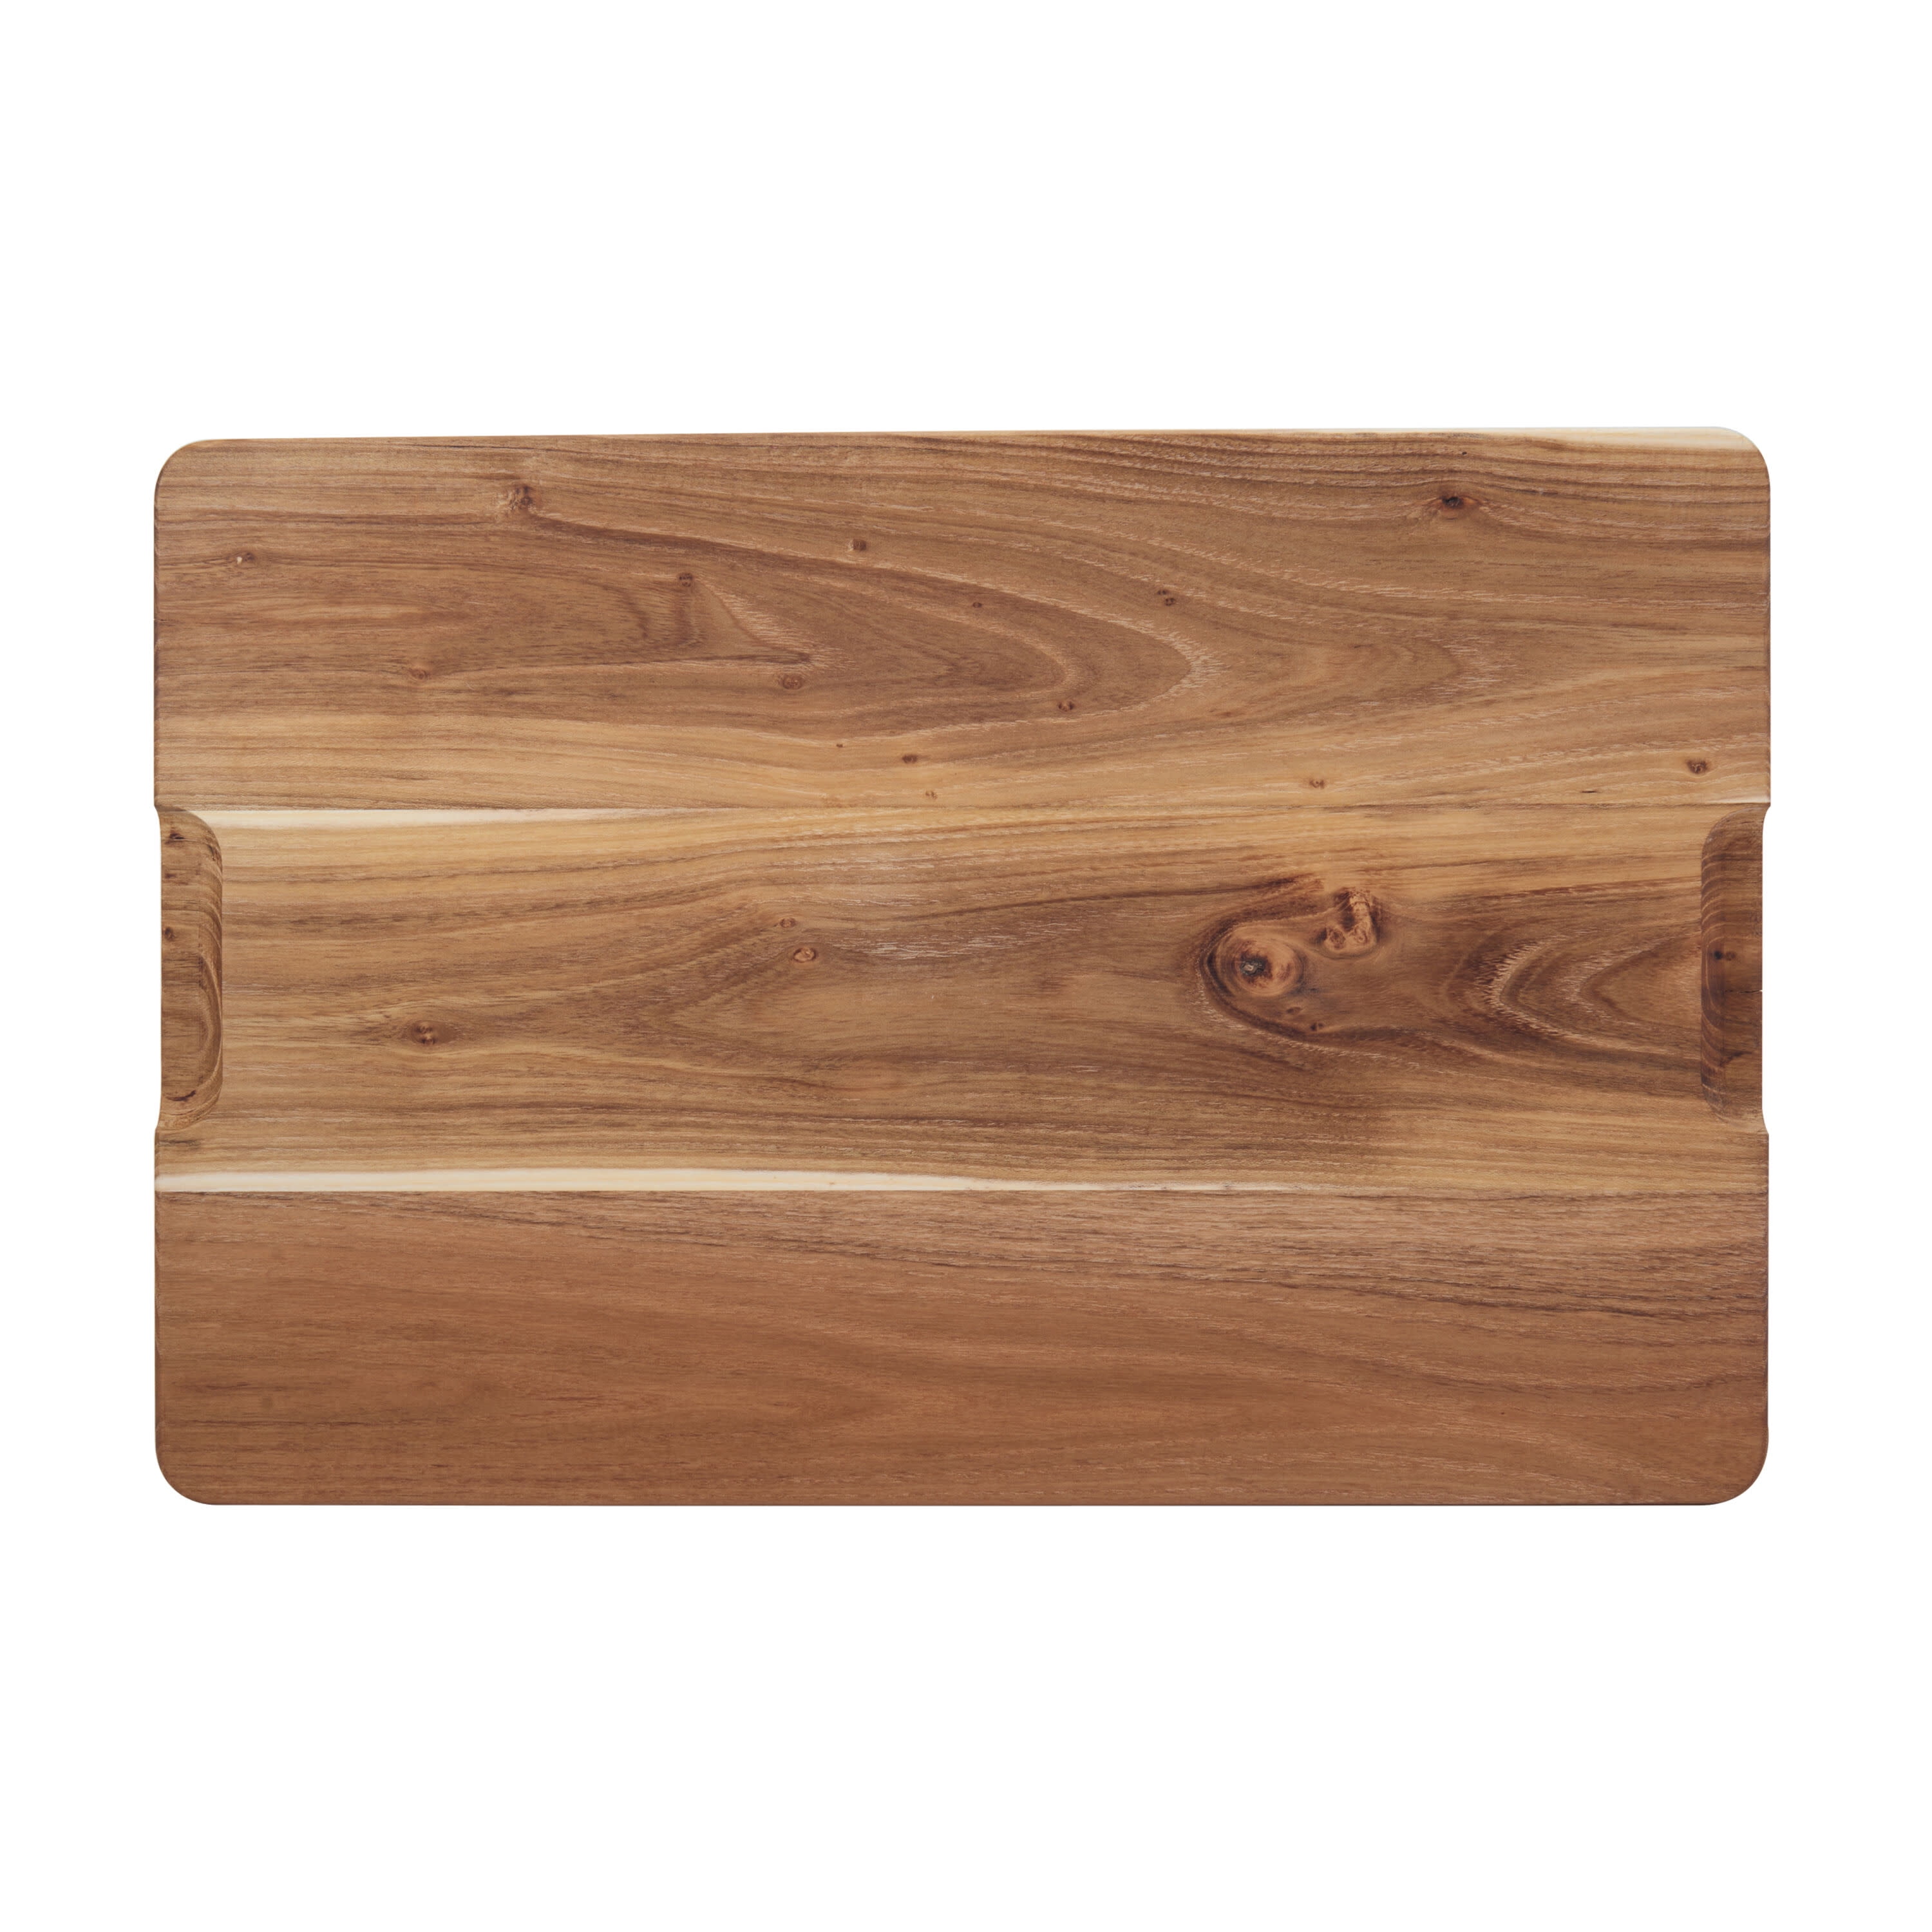 TeakCraft Large Wood Cutting Board with Juice Grove, Chopping Board, Knife  Friendly, Reversible, Cheese Board, Gift Box Included, The Epirus